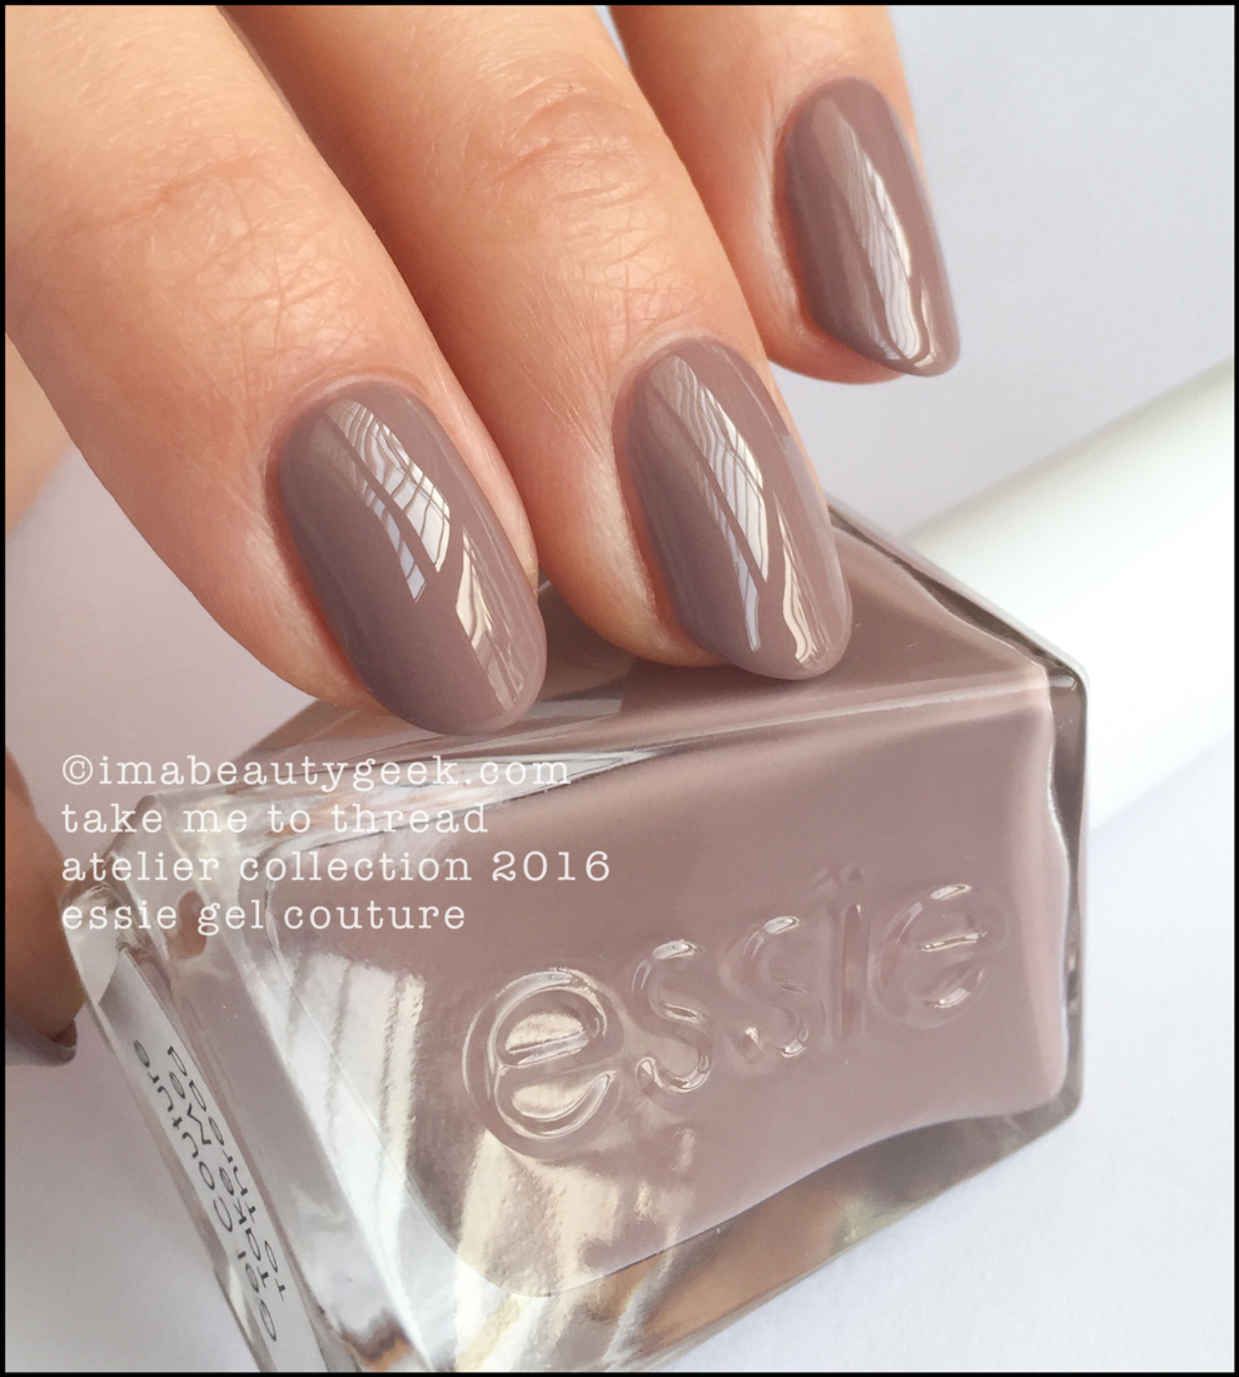 Essie Gel Couture Launch Collection All 42 Swatches Review Essie Gel Couture Essie Gel Essie Gel Couture Swatches